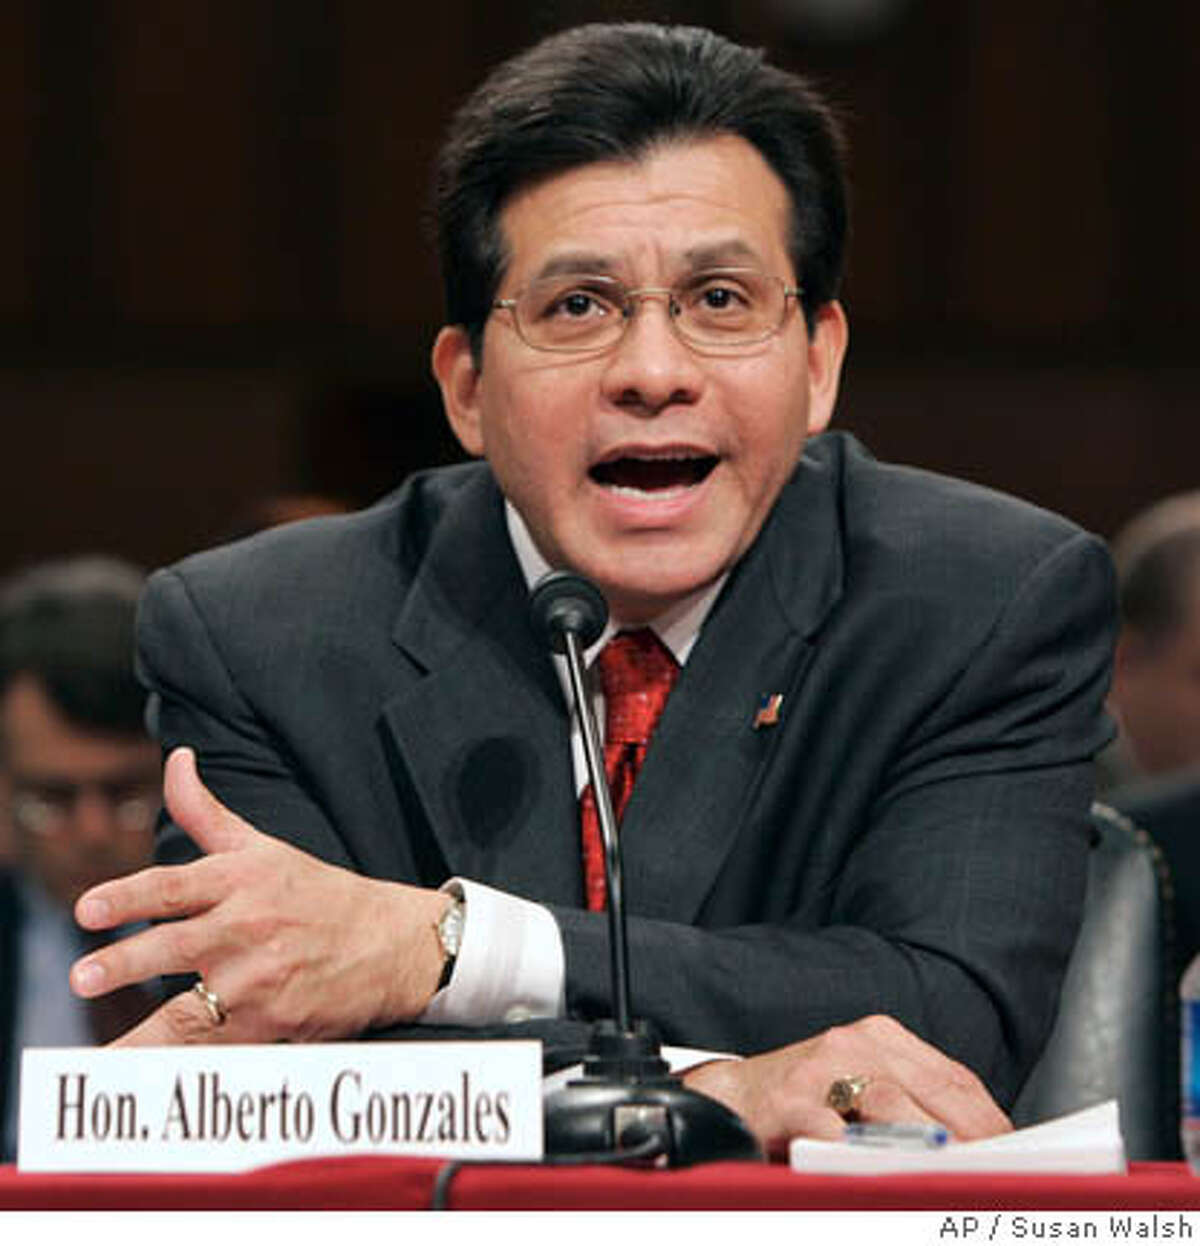 Attorney General Alberto Gonzales testifies before the Senate Judiciary Committee in the U. S. Capitol in Washington Thursday, April 19, 2007 about the controversial dismissal of eight U.S. attorneys. (AP Photo/Susan Walsh)